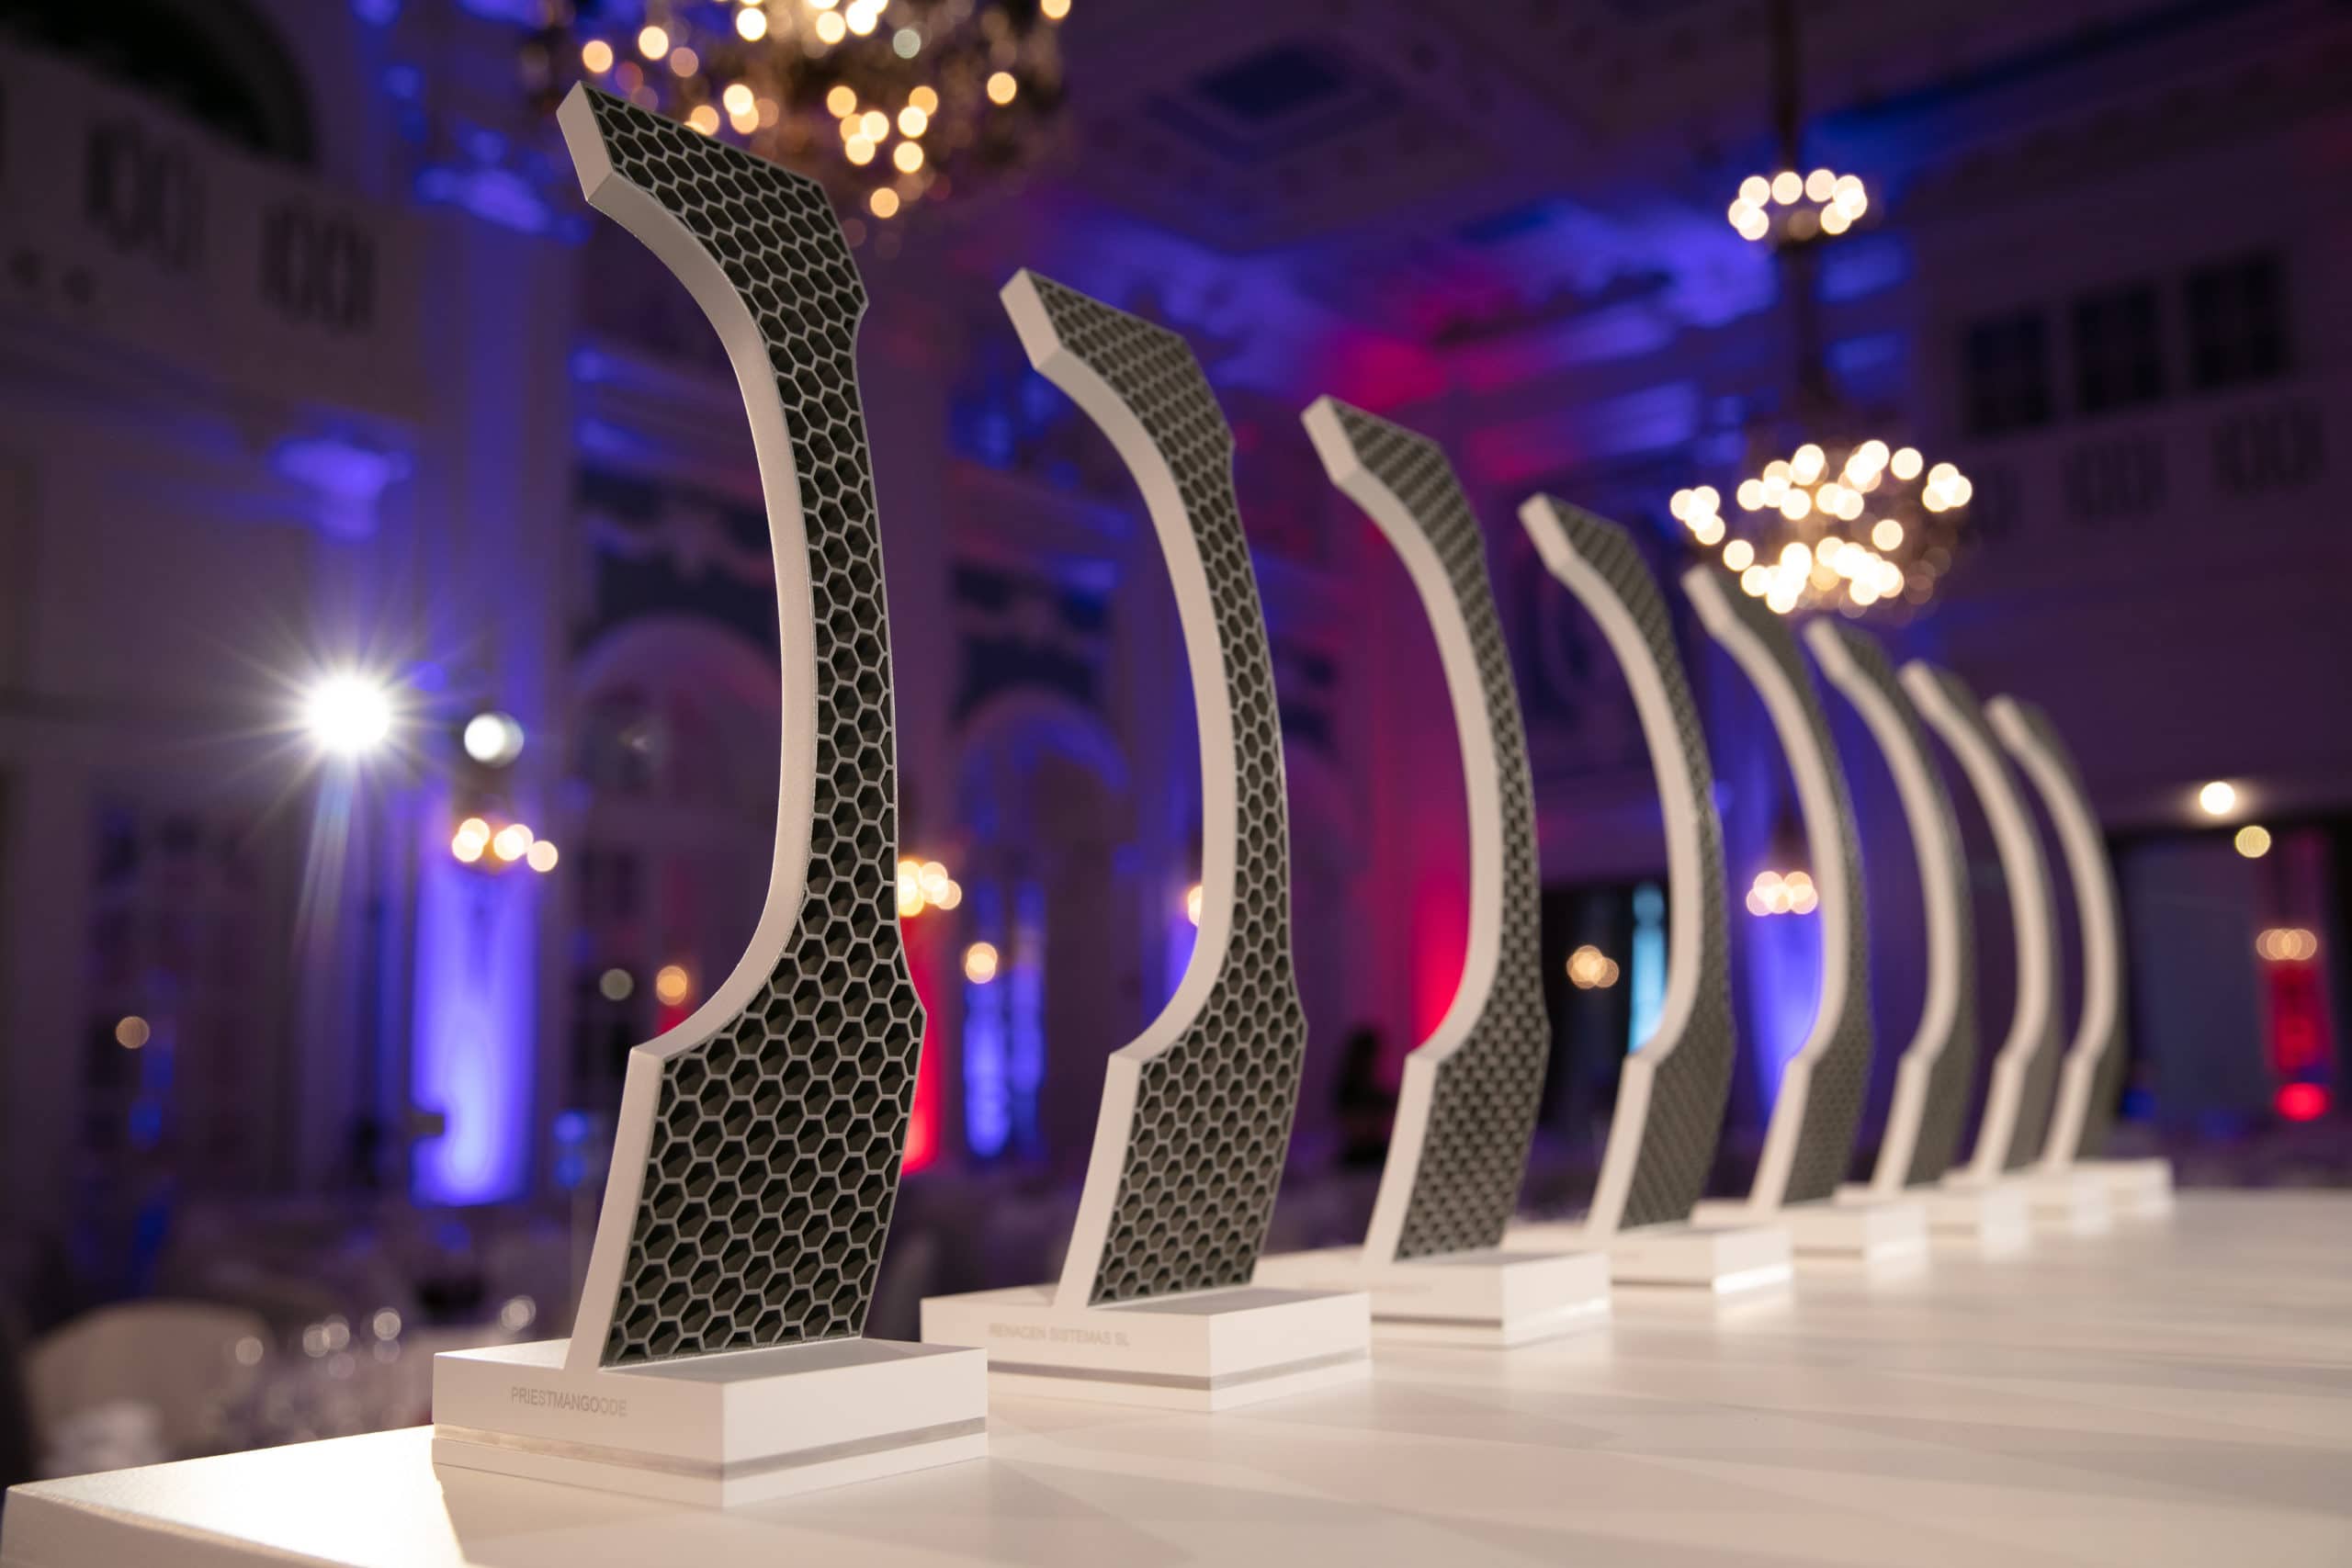 The Crystal Cabin Award Announces Special New PaxEx Category